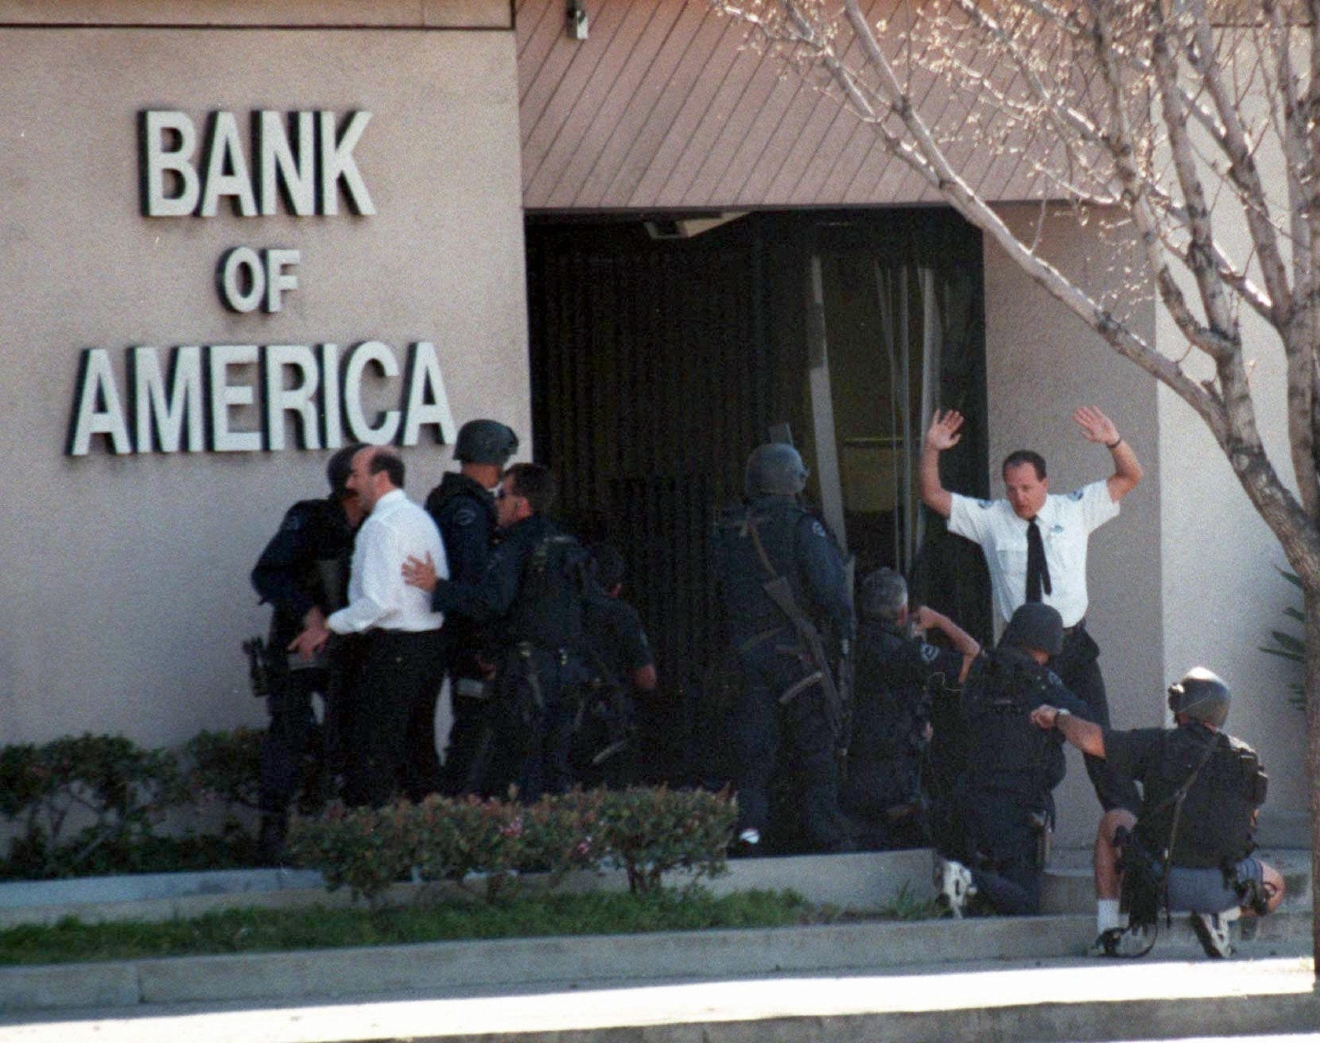 LAPD marks 20 years since infamous bank robbery, shootout KBAK